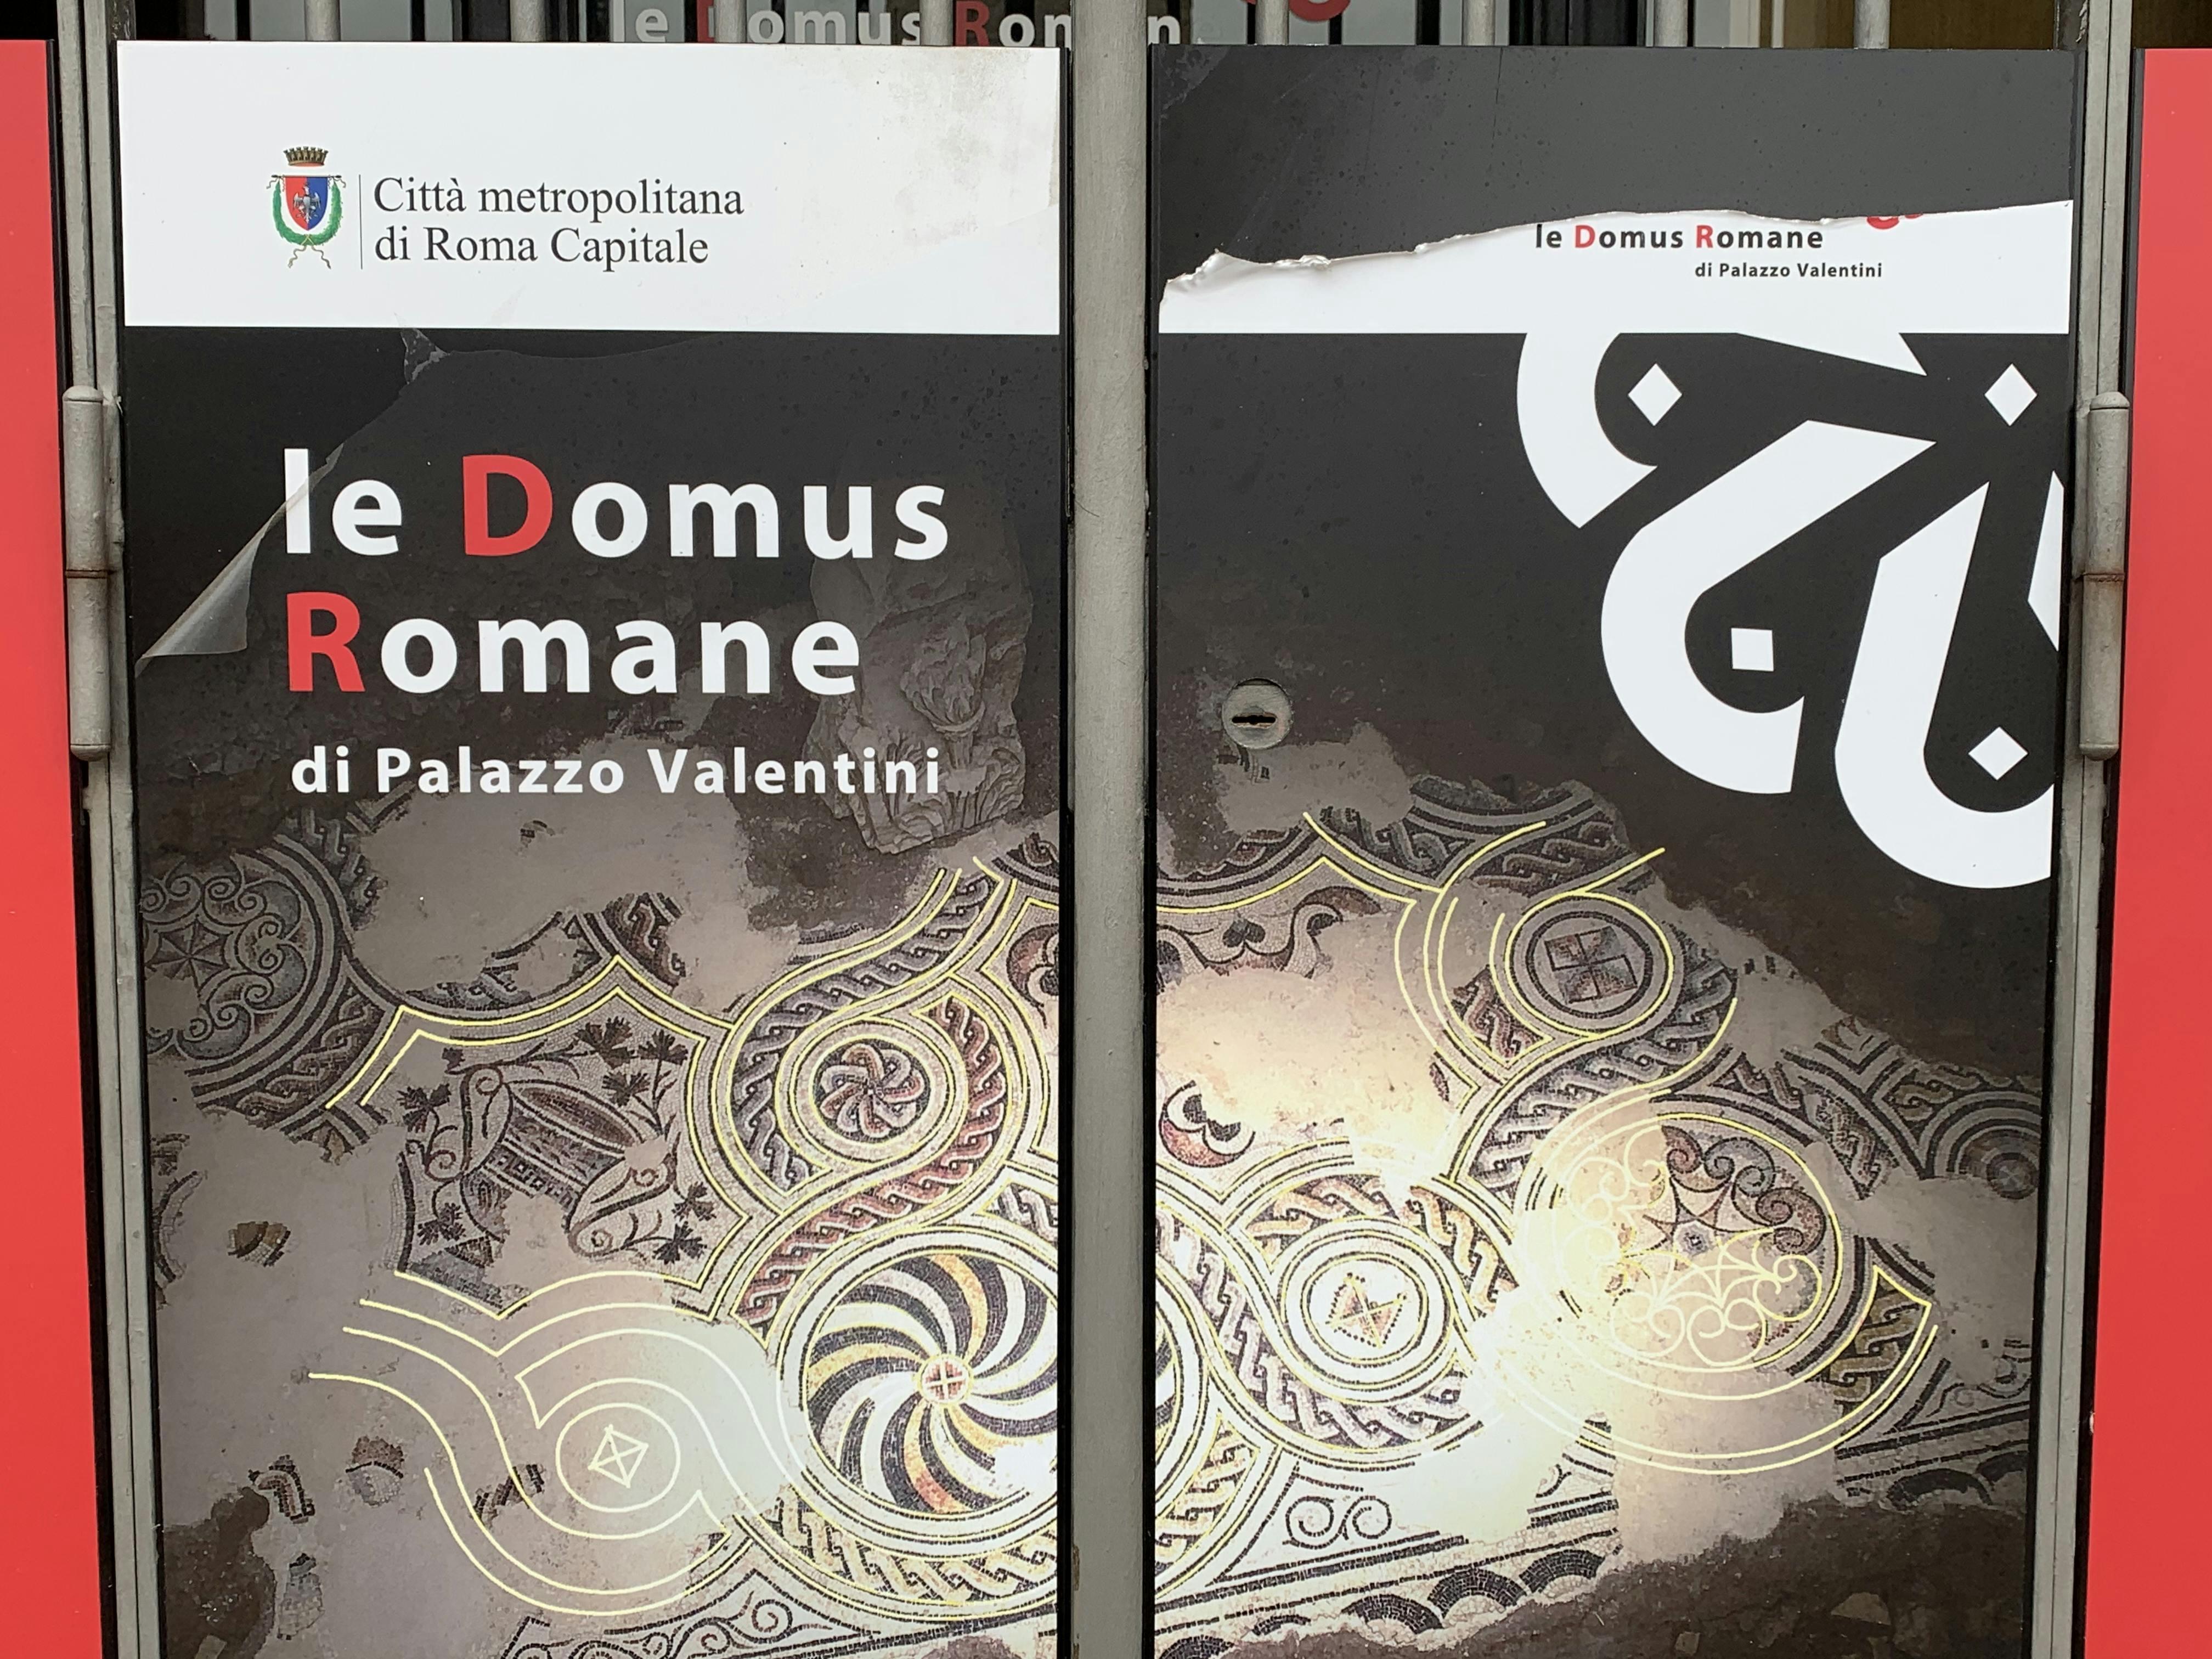 Roman Domus of Palazzo Valentini Tickets with Multimedia Experience